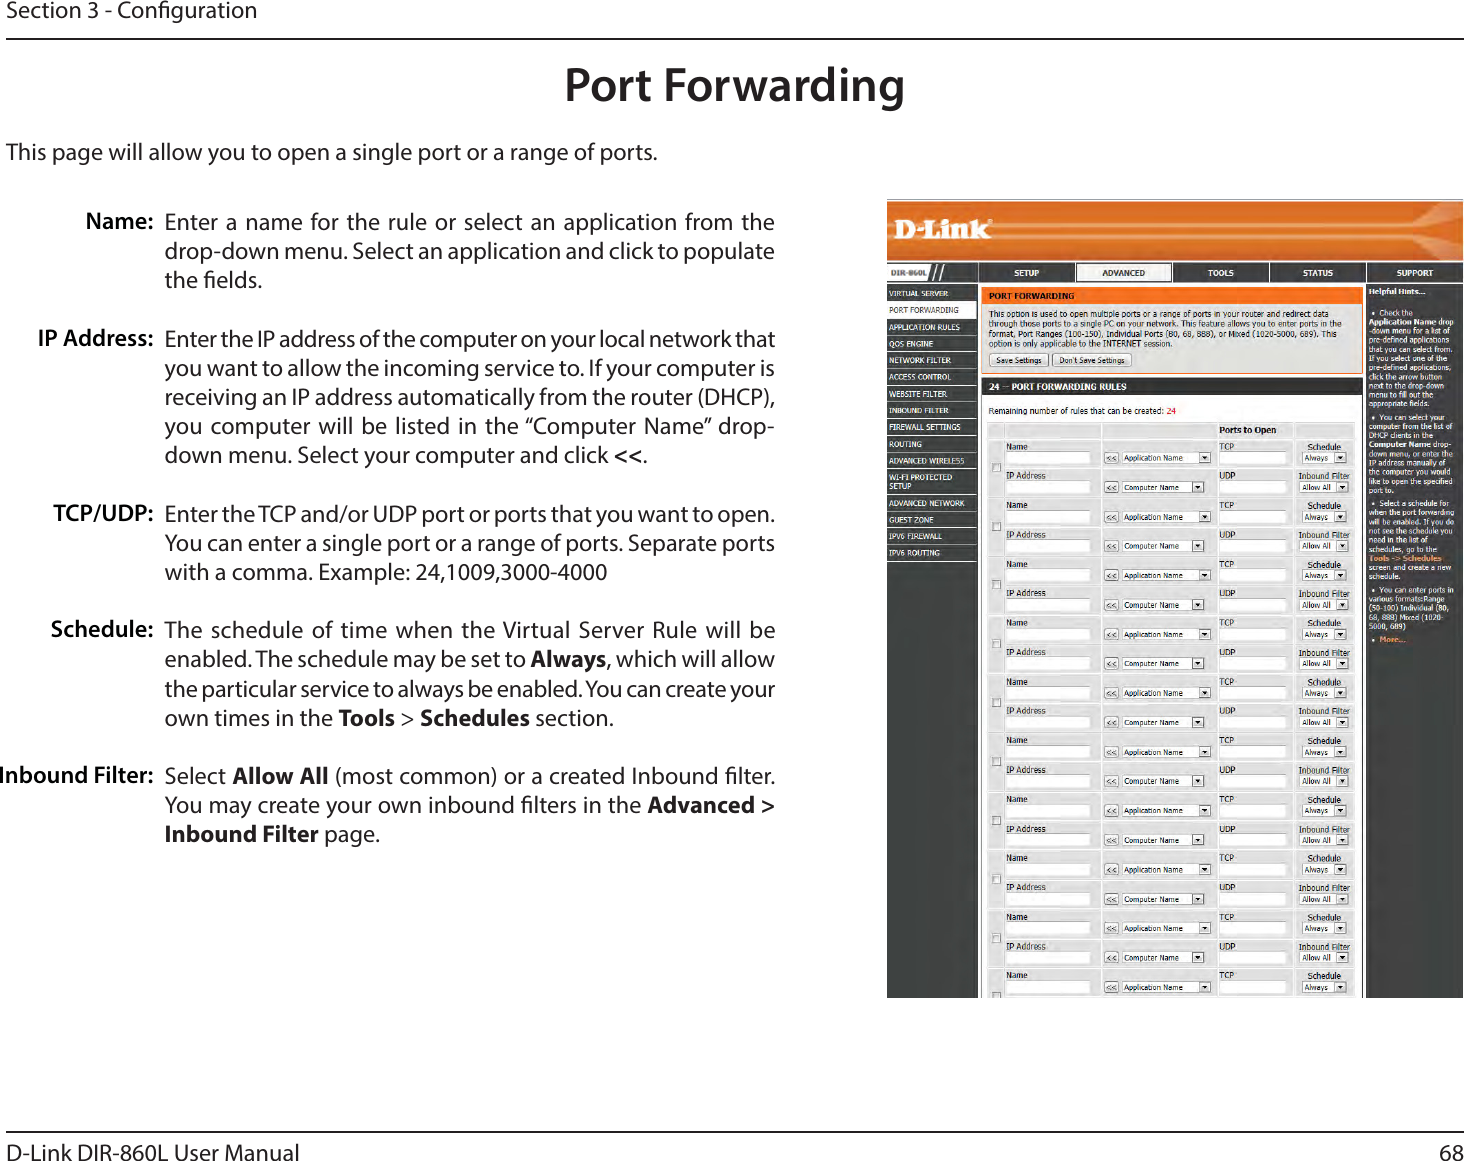 68D-Link DIR-860L User ManualSection 3 - CongurationThis page will allow you to open a single port or a range of ports.Port ForwardingEnter a name for the rule or select an application from the drop-down menu. Select an application and click to populate the elds.Enter the IP address of the computer on your local network that you want to allow the incoming service to. If your computer is receiving an IP address automatically from the router (DHCP), you computer will be listed in the “Computer Name” drop-down menu. Select your computer and click &lt;&lt;. Enter the TCP and/or UDP port or ports that you want to open. You can enter a single port or a range of ports. Separate ports XJUIBDPNNB&amp;YBNQMFThe schedule of time when the Virtual Server Rule will be enabled. The schedule may be set to &quot;MXBZT, which will allow the particular service to always be enabled. You can create your own times in the Tools &gt; Schedules section.Select &quot;MMPX&quot;MM (most common) or a created Inbound lter. You may create your own inbound lters in the &quot;EWBODFEInbound Filter page.Name:IP Address:TCP/UDP:Schedule:Inbound Filter: